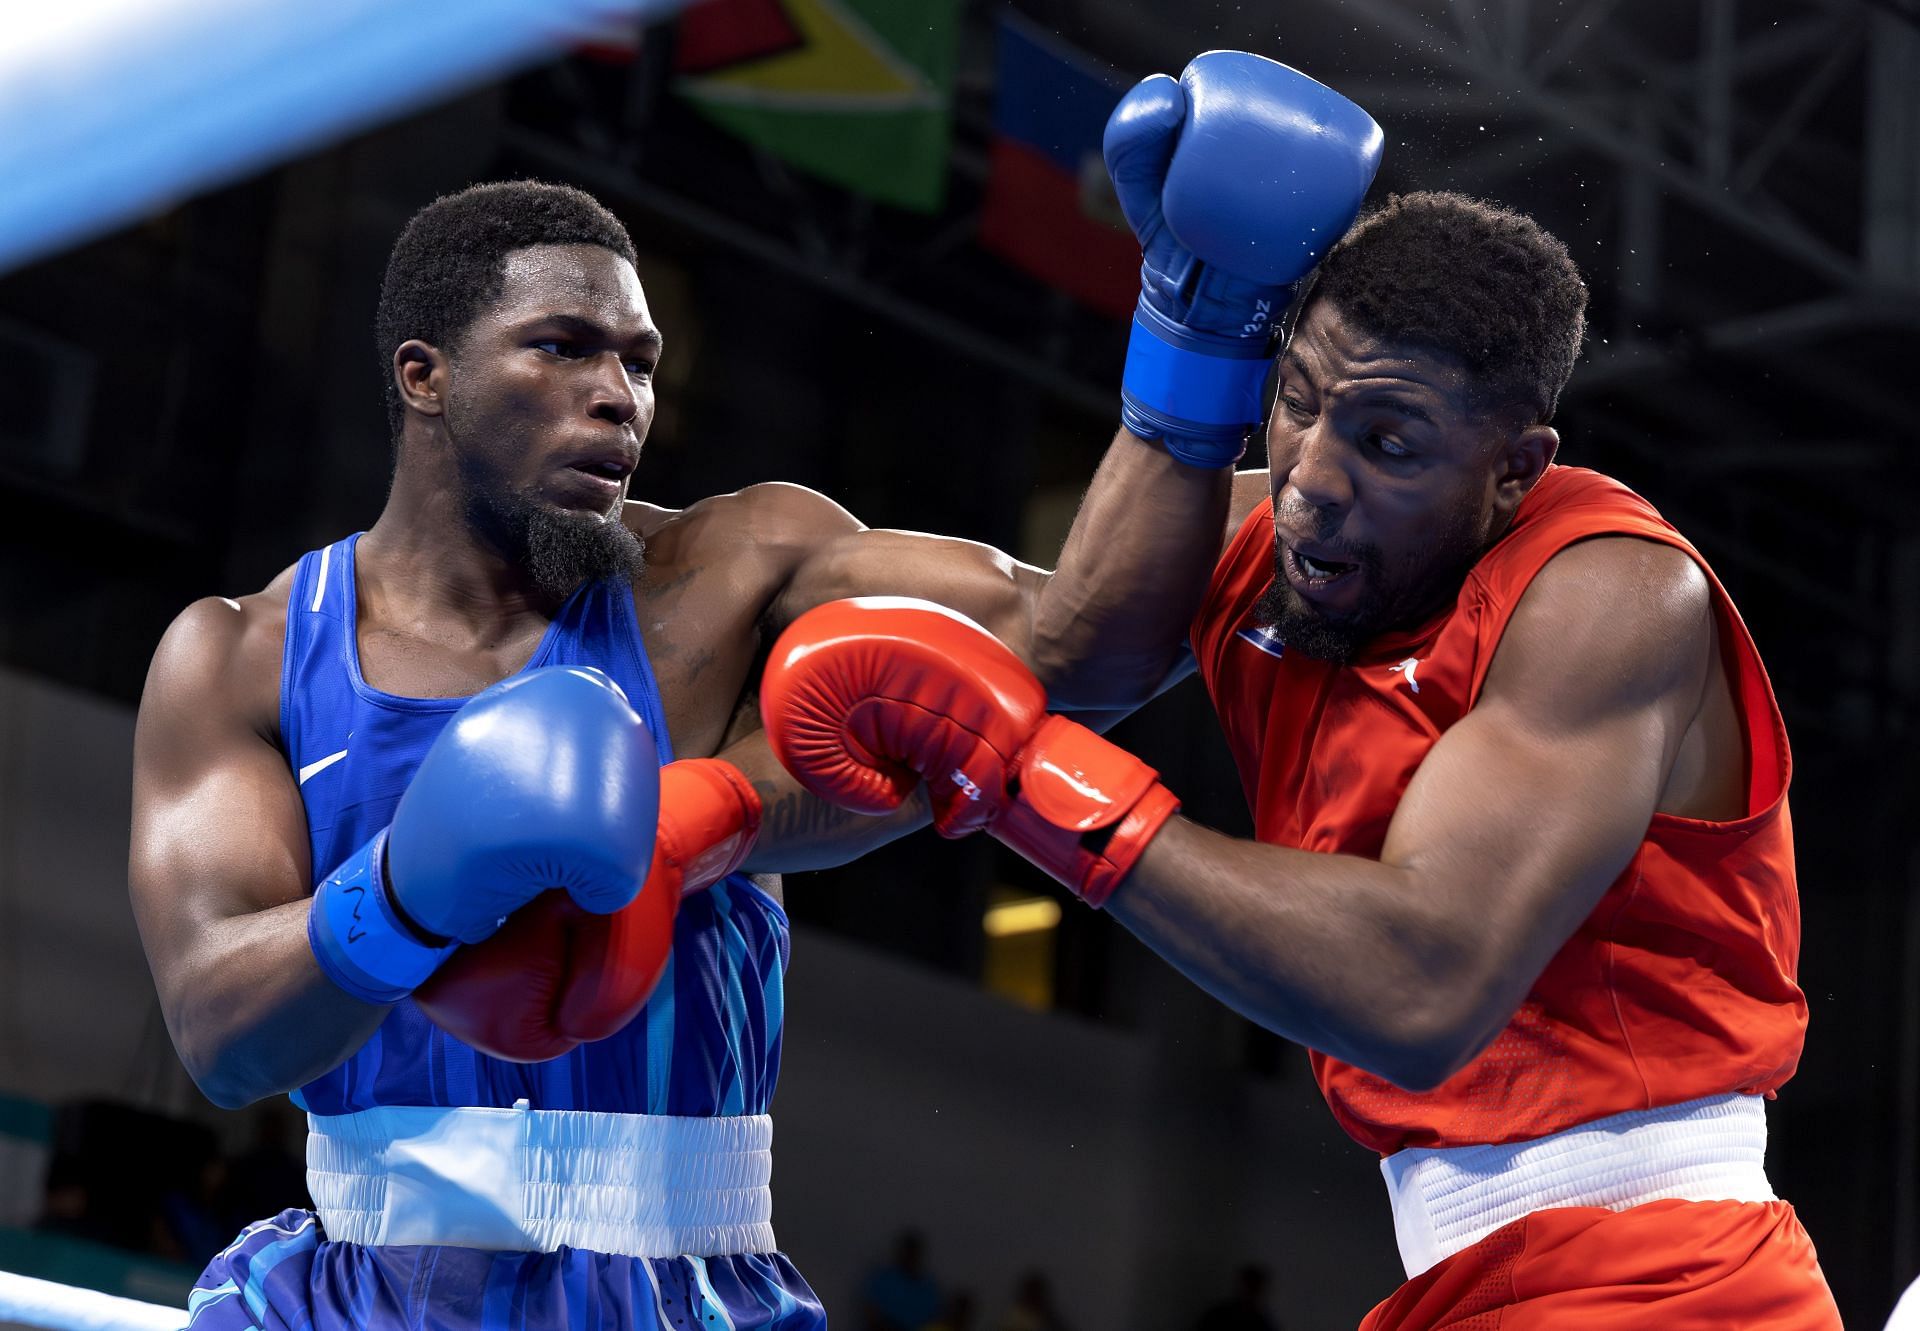 Joshua Edwards of Team United States (blue) punches Fernando Alejandro Arzola of Team Cuba (red) on Boxing - Men&#039;s +92kg semifinals at the 2023 Pan Am Games in Santiago, Chile